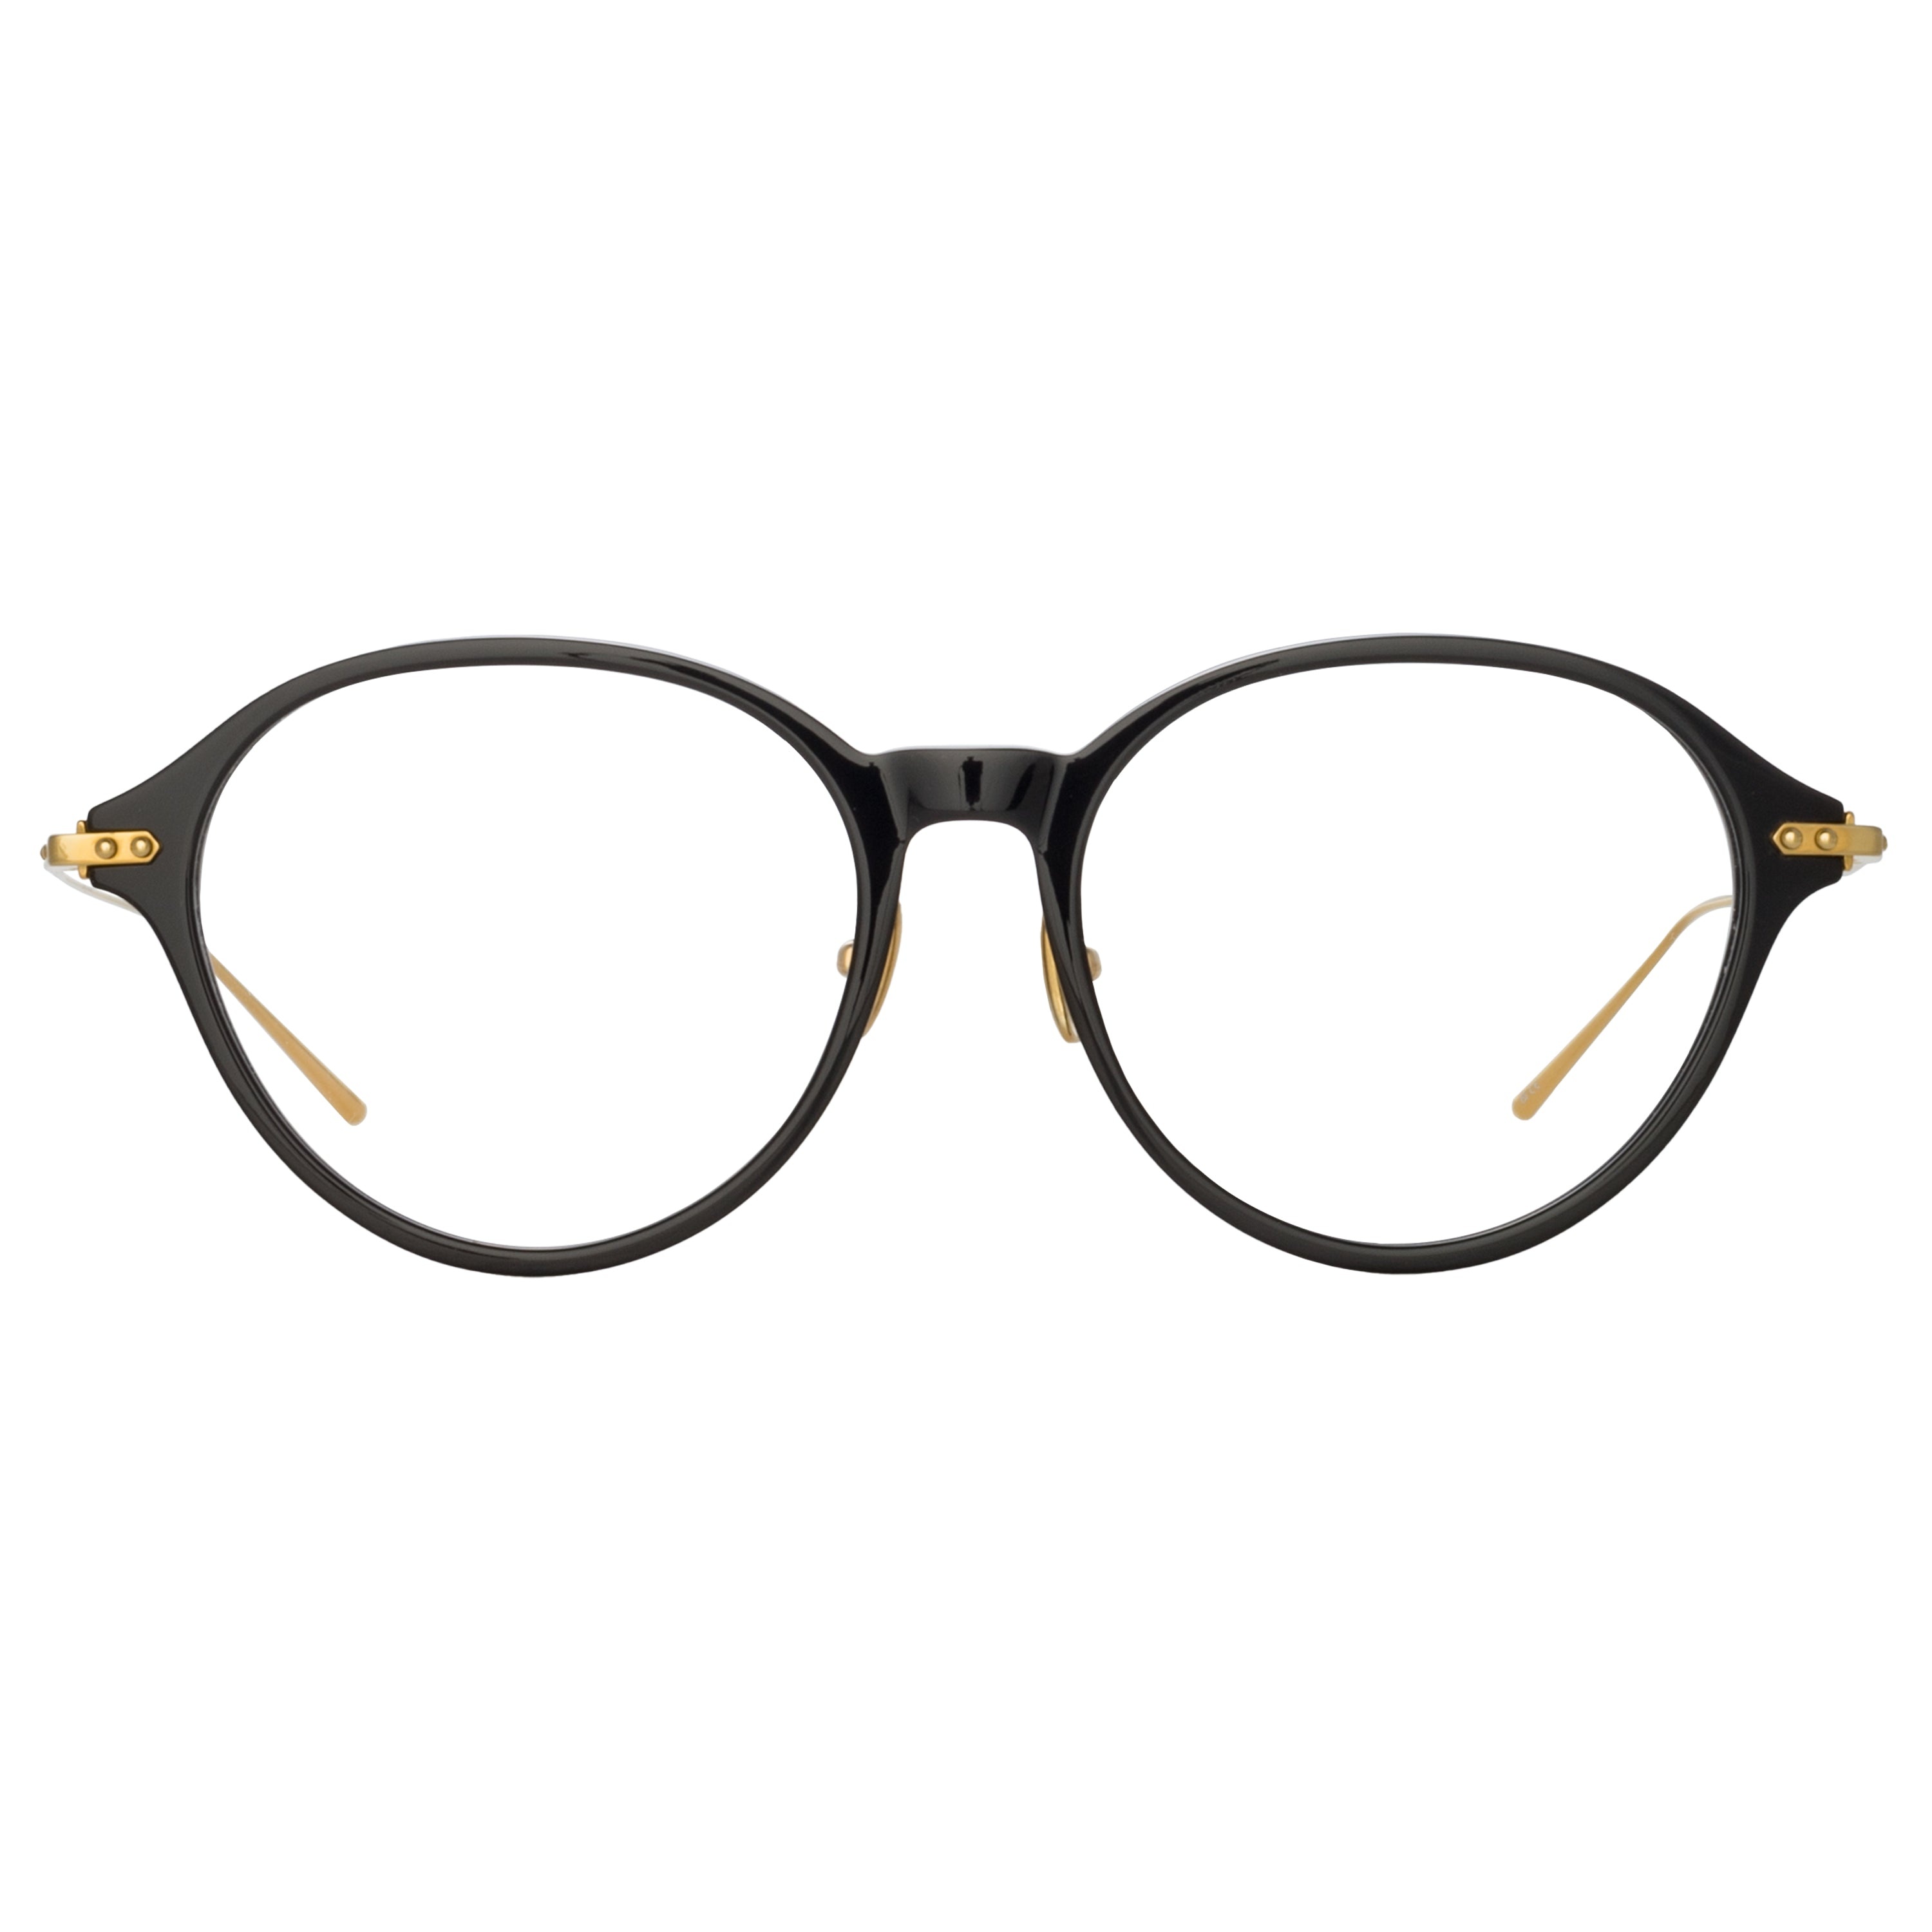 PEARCE OVAL OPTICAL FRAME IN BLACK (ASIAN FIT) - 1